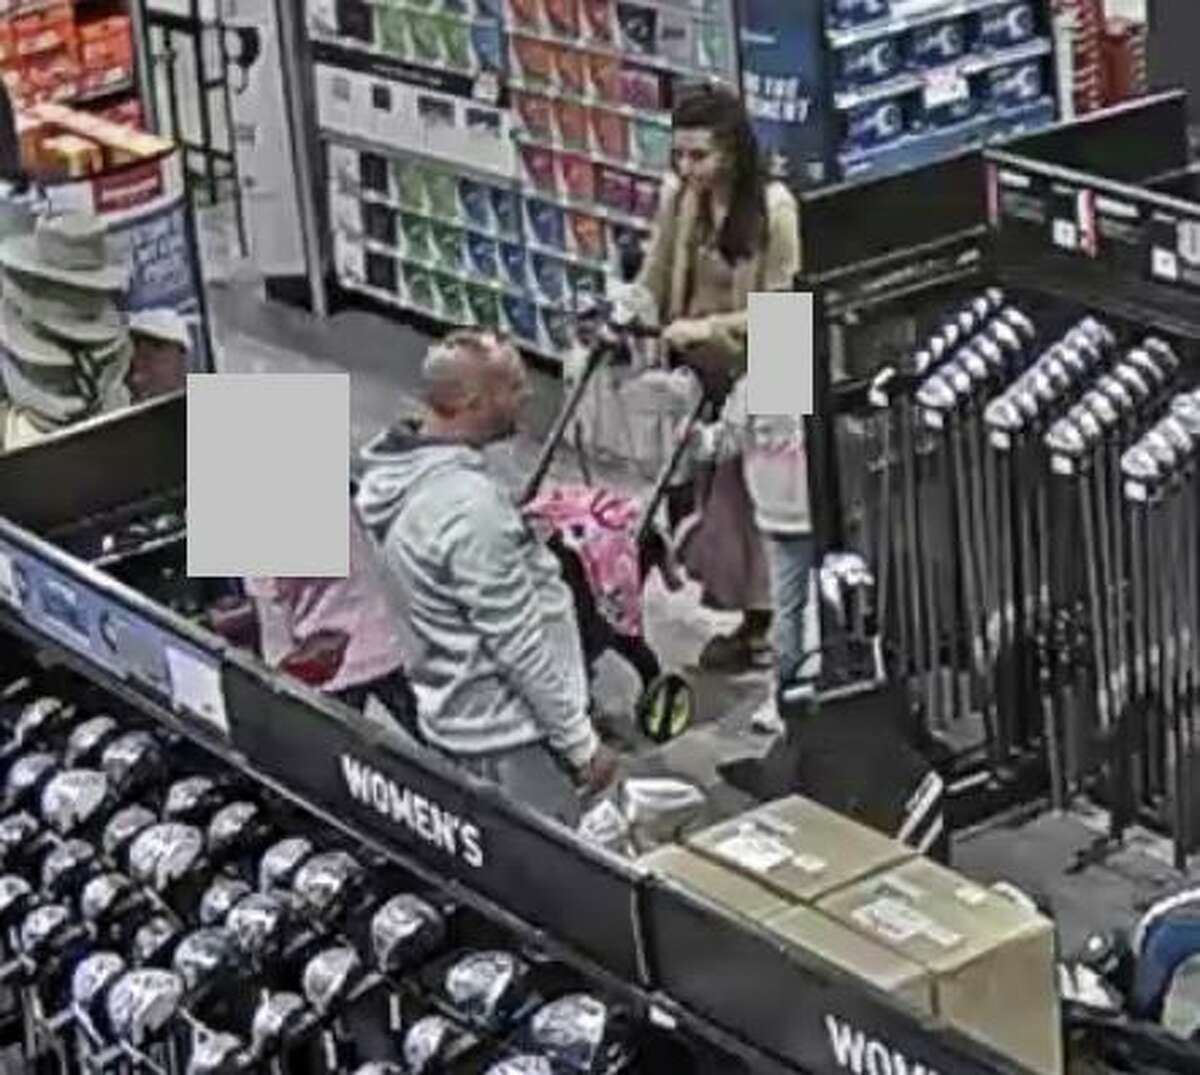 Midland Police Department is searching for DICK’s Sporting Goods theft suspects that stole golf equipment,